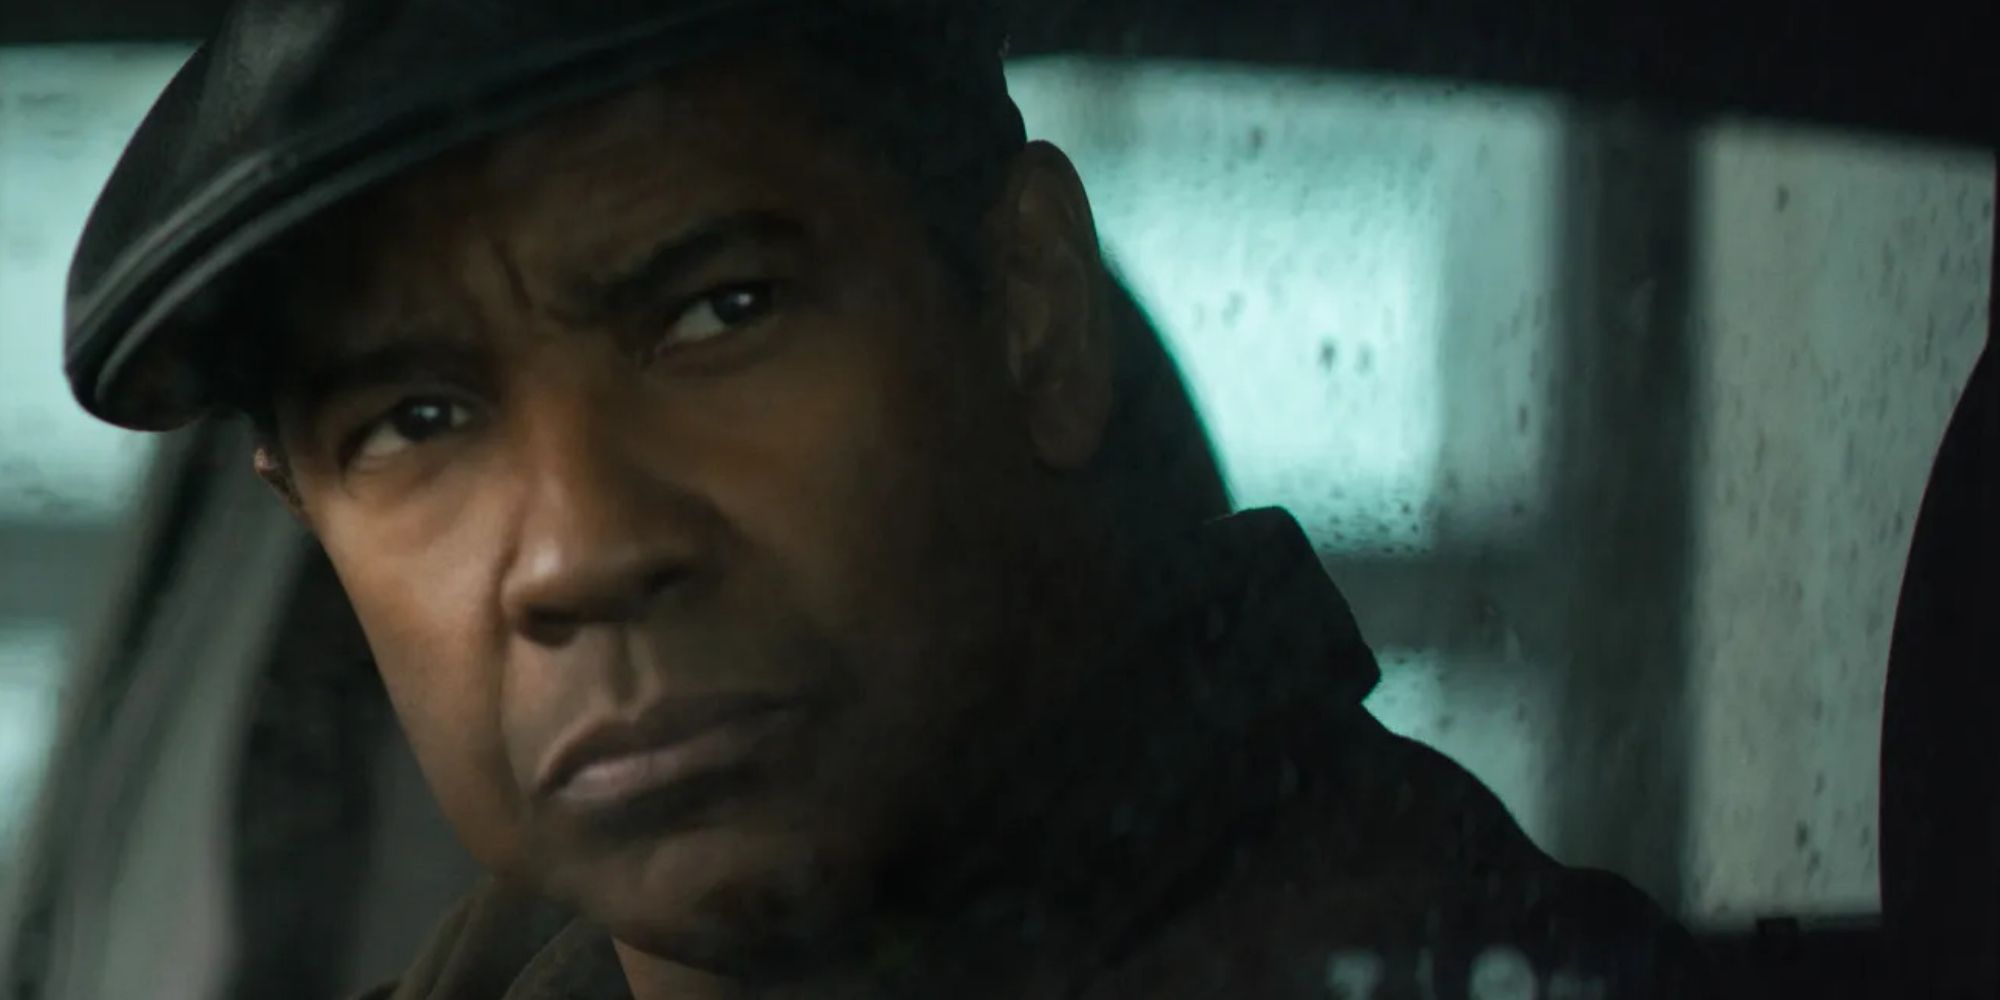 Robert McCall (Denzel Washington) surveys the scene from a car in 'The Equalizer' (2014)